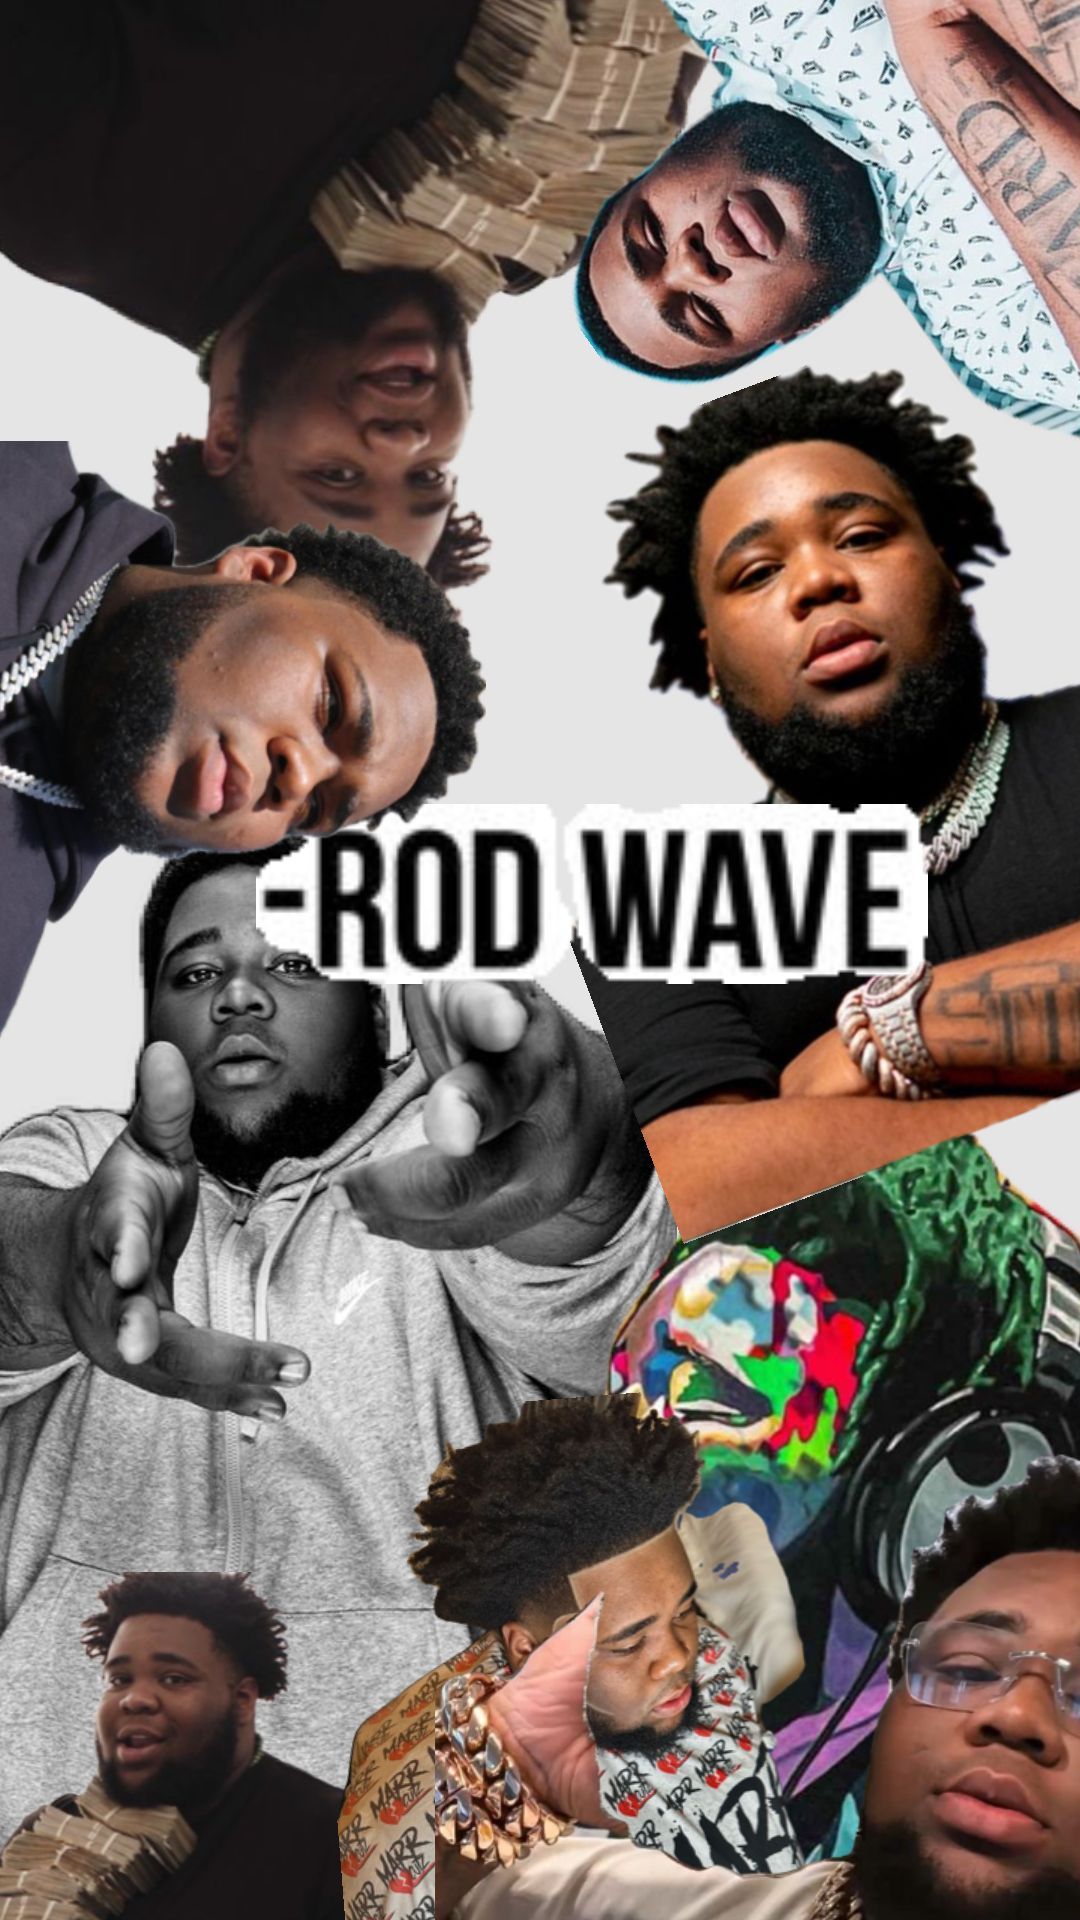 Rod Wave iPhone Wallpaper with high-resolution 1080x1920 pixel. You can use this wallpaper for your iPhone 5, 6, 7, 8, X, XS, XR backgrounds, Mobile Screensaver, or iPad Lock Screen - Rod Wave